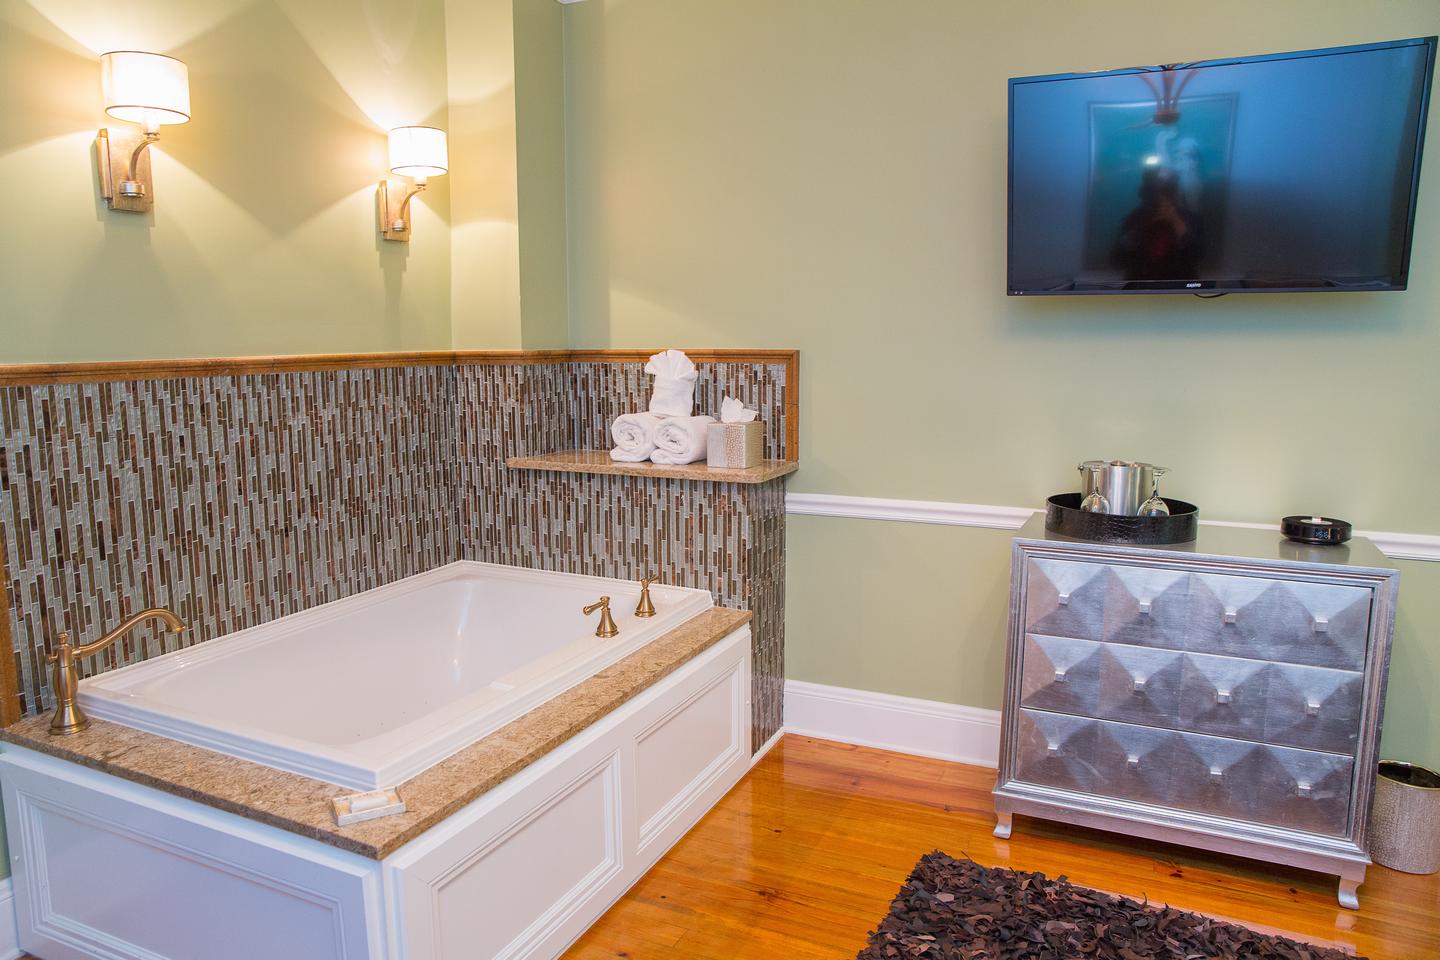 Travelers to St. Augustine can relax after a long day in this luxurious jetted tub. The sconces are on dimmers for a romantic atmosphere.